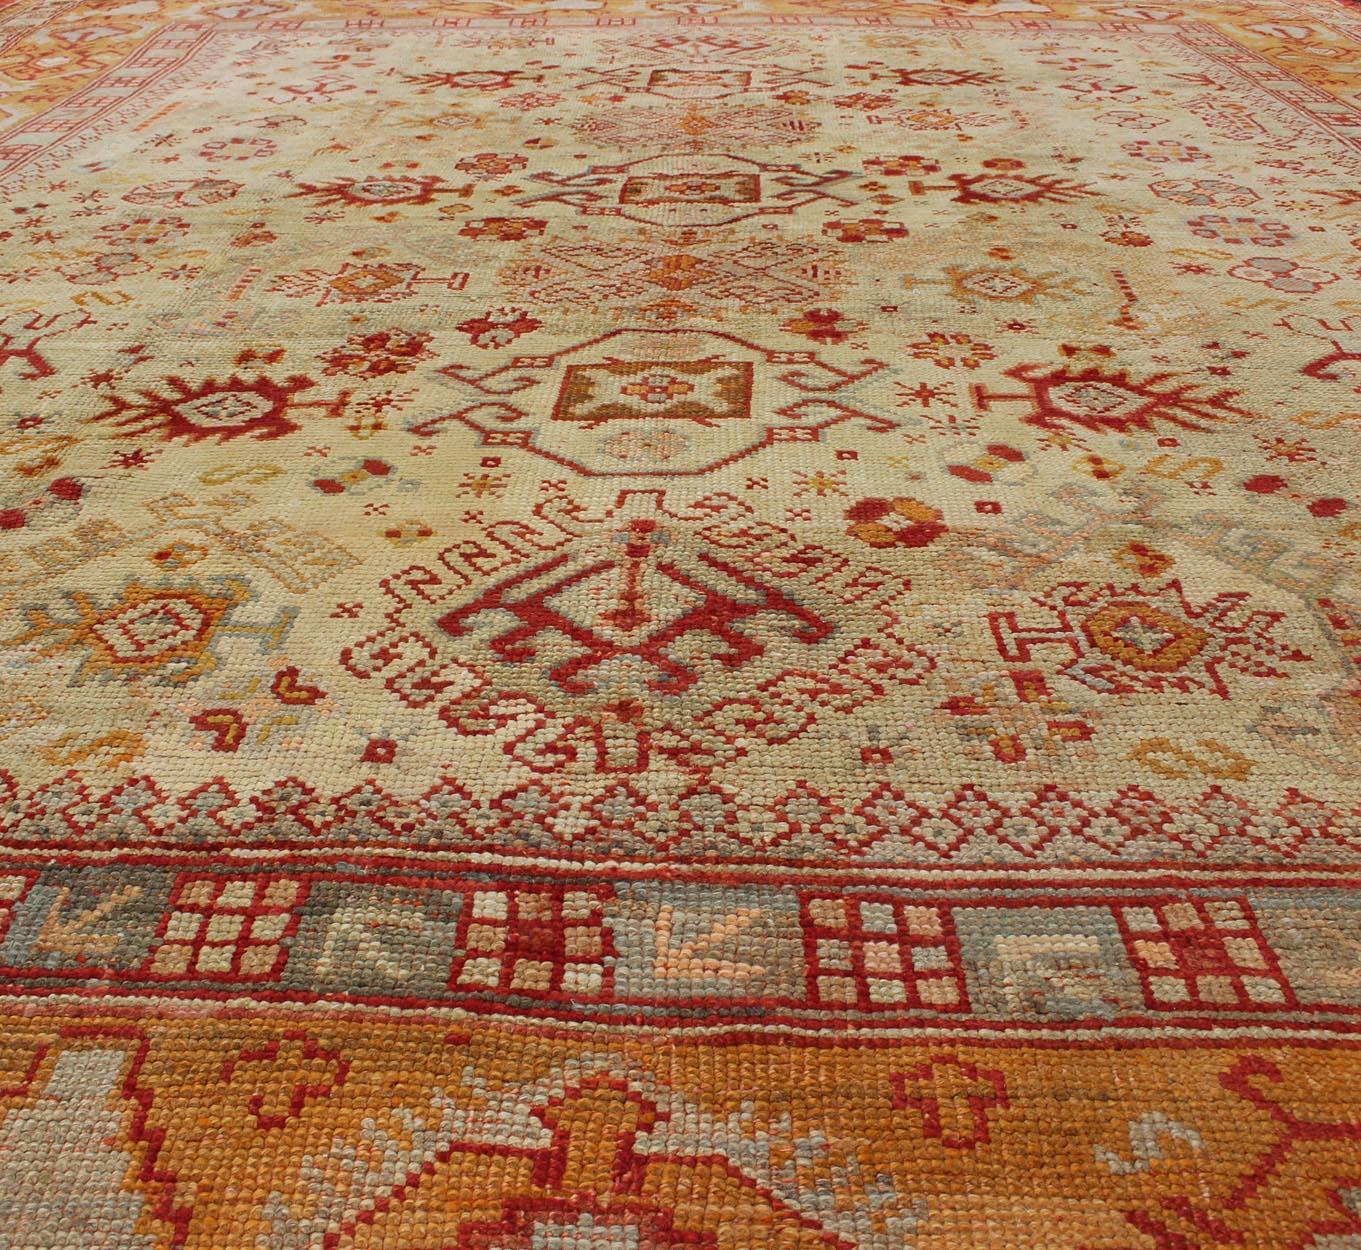 Antique Turkish Oushak Carpet With All-Over Design In Red, Taupe, and Orange For Sale 4